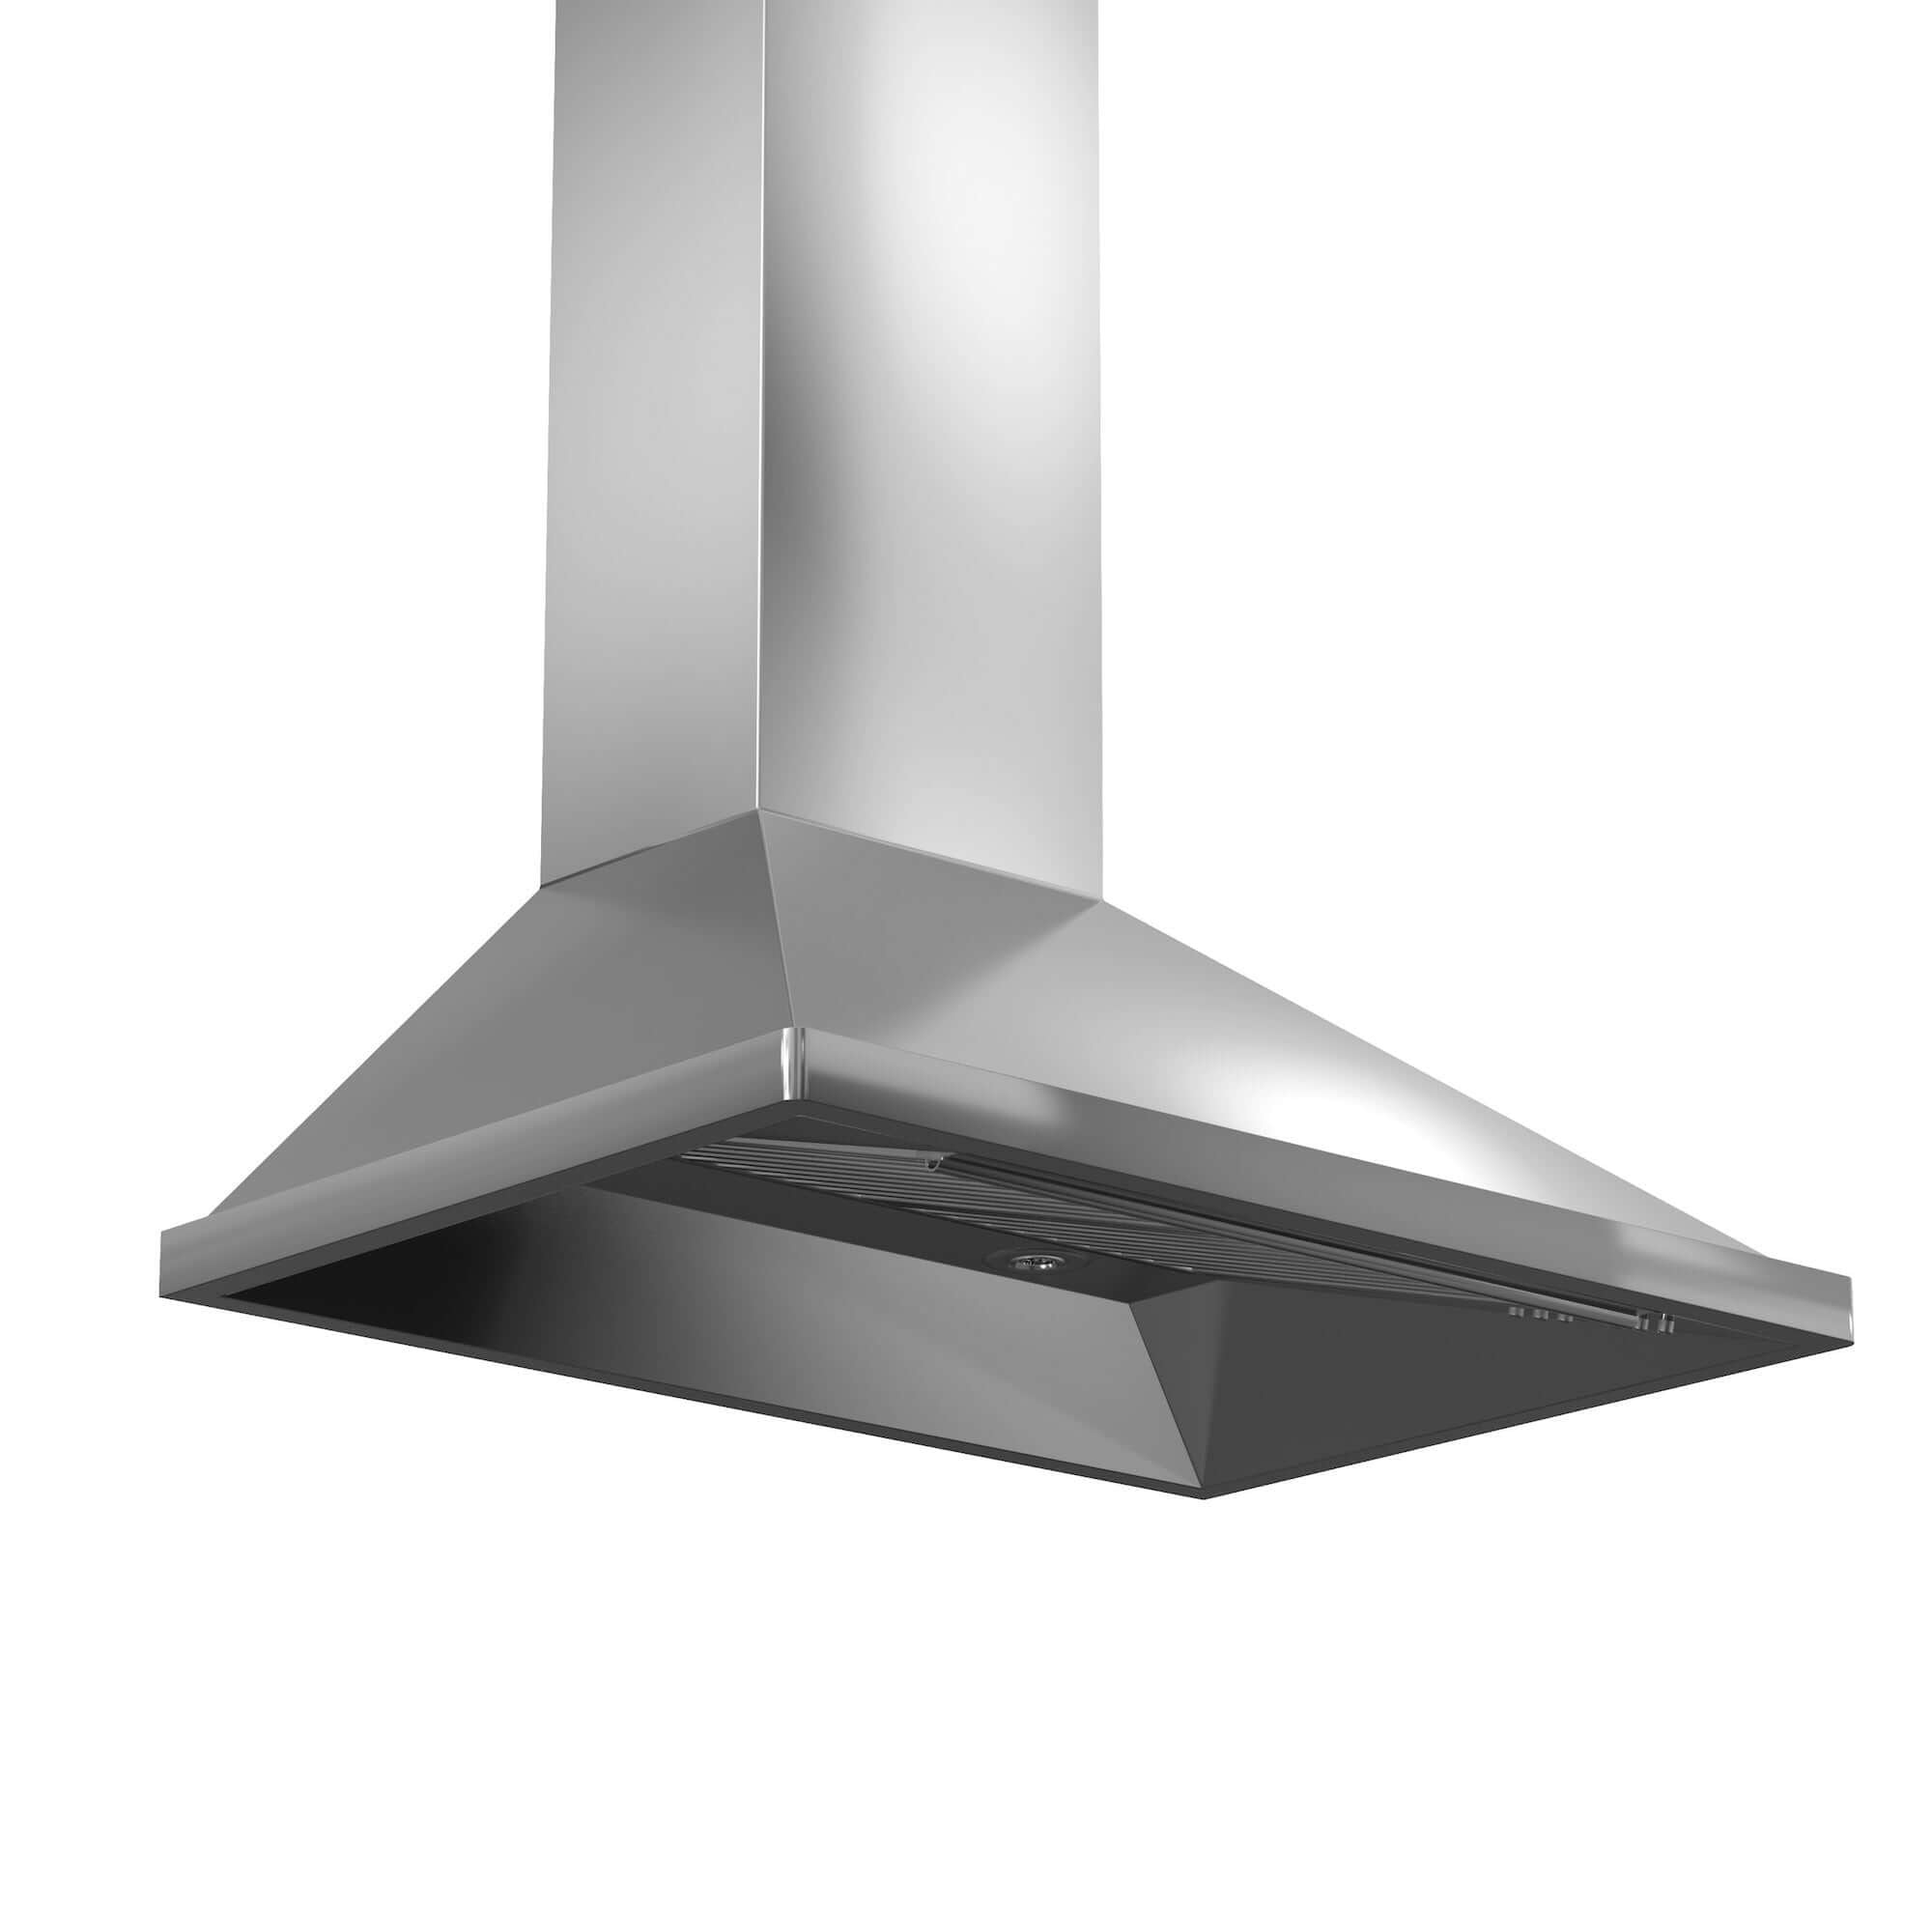 ZLINE 36 in. Convertible Vent Wall Mount Range Hood in Outdoor Approved Stainless Steel (696-304-36) side, under.